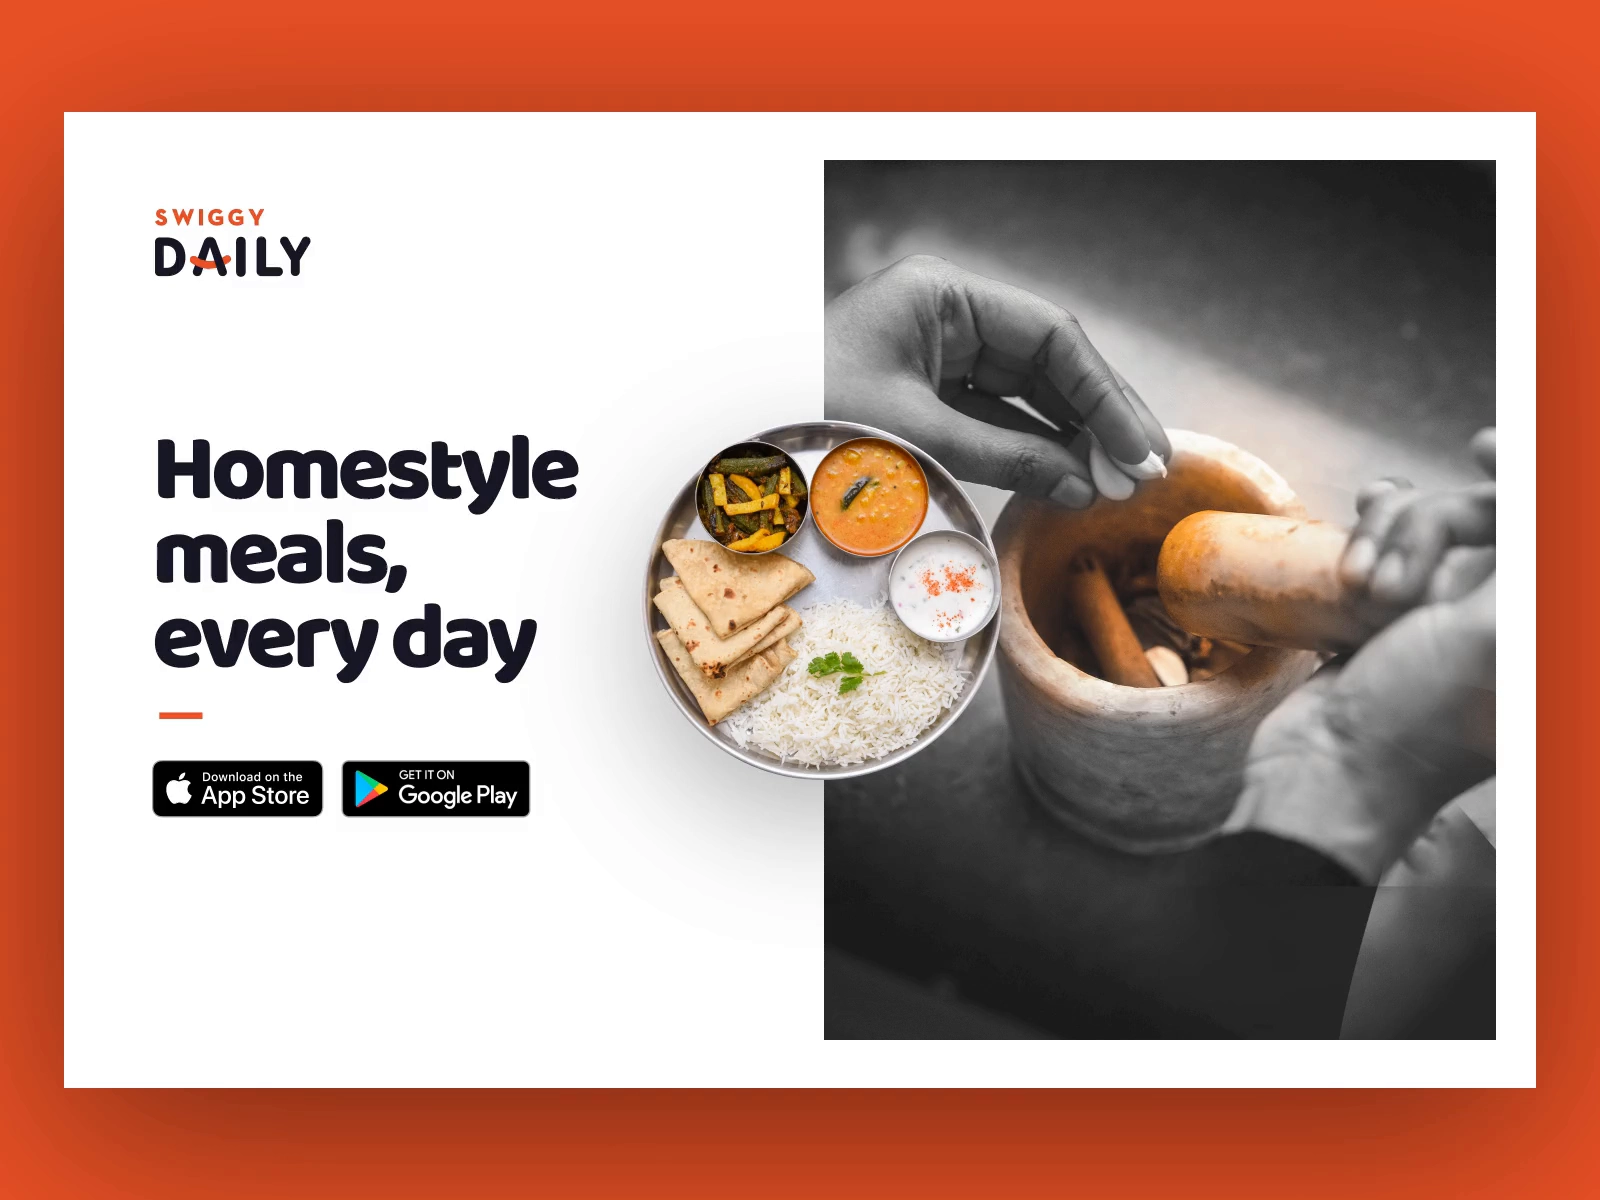 Swiggy launches ‘Daily’ app for ordering tiffins, homestyle meals